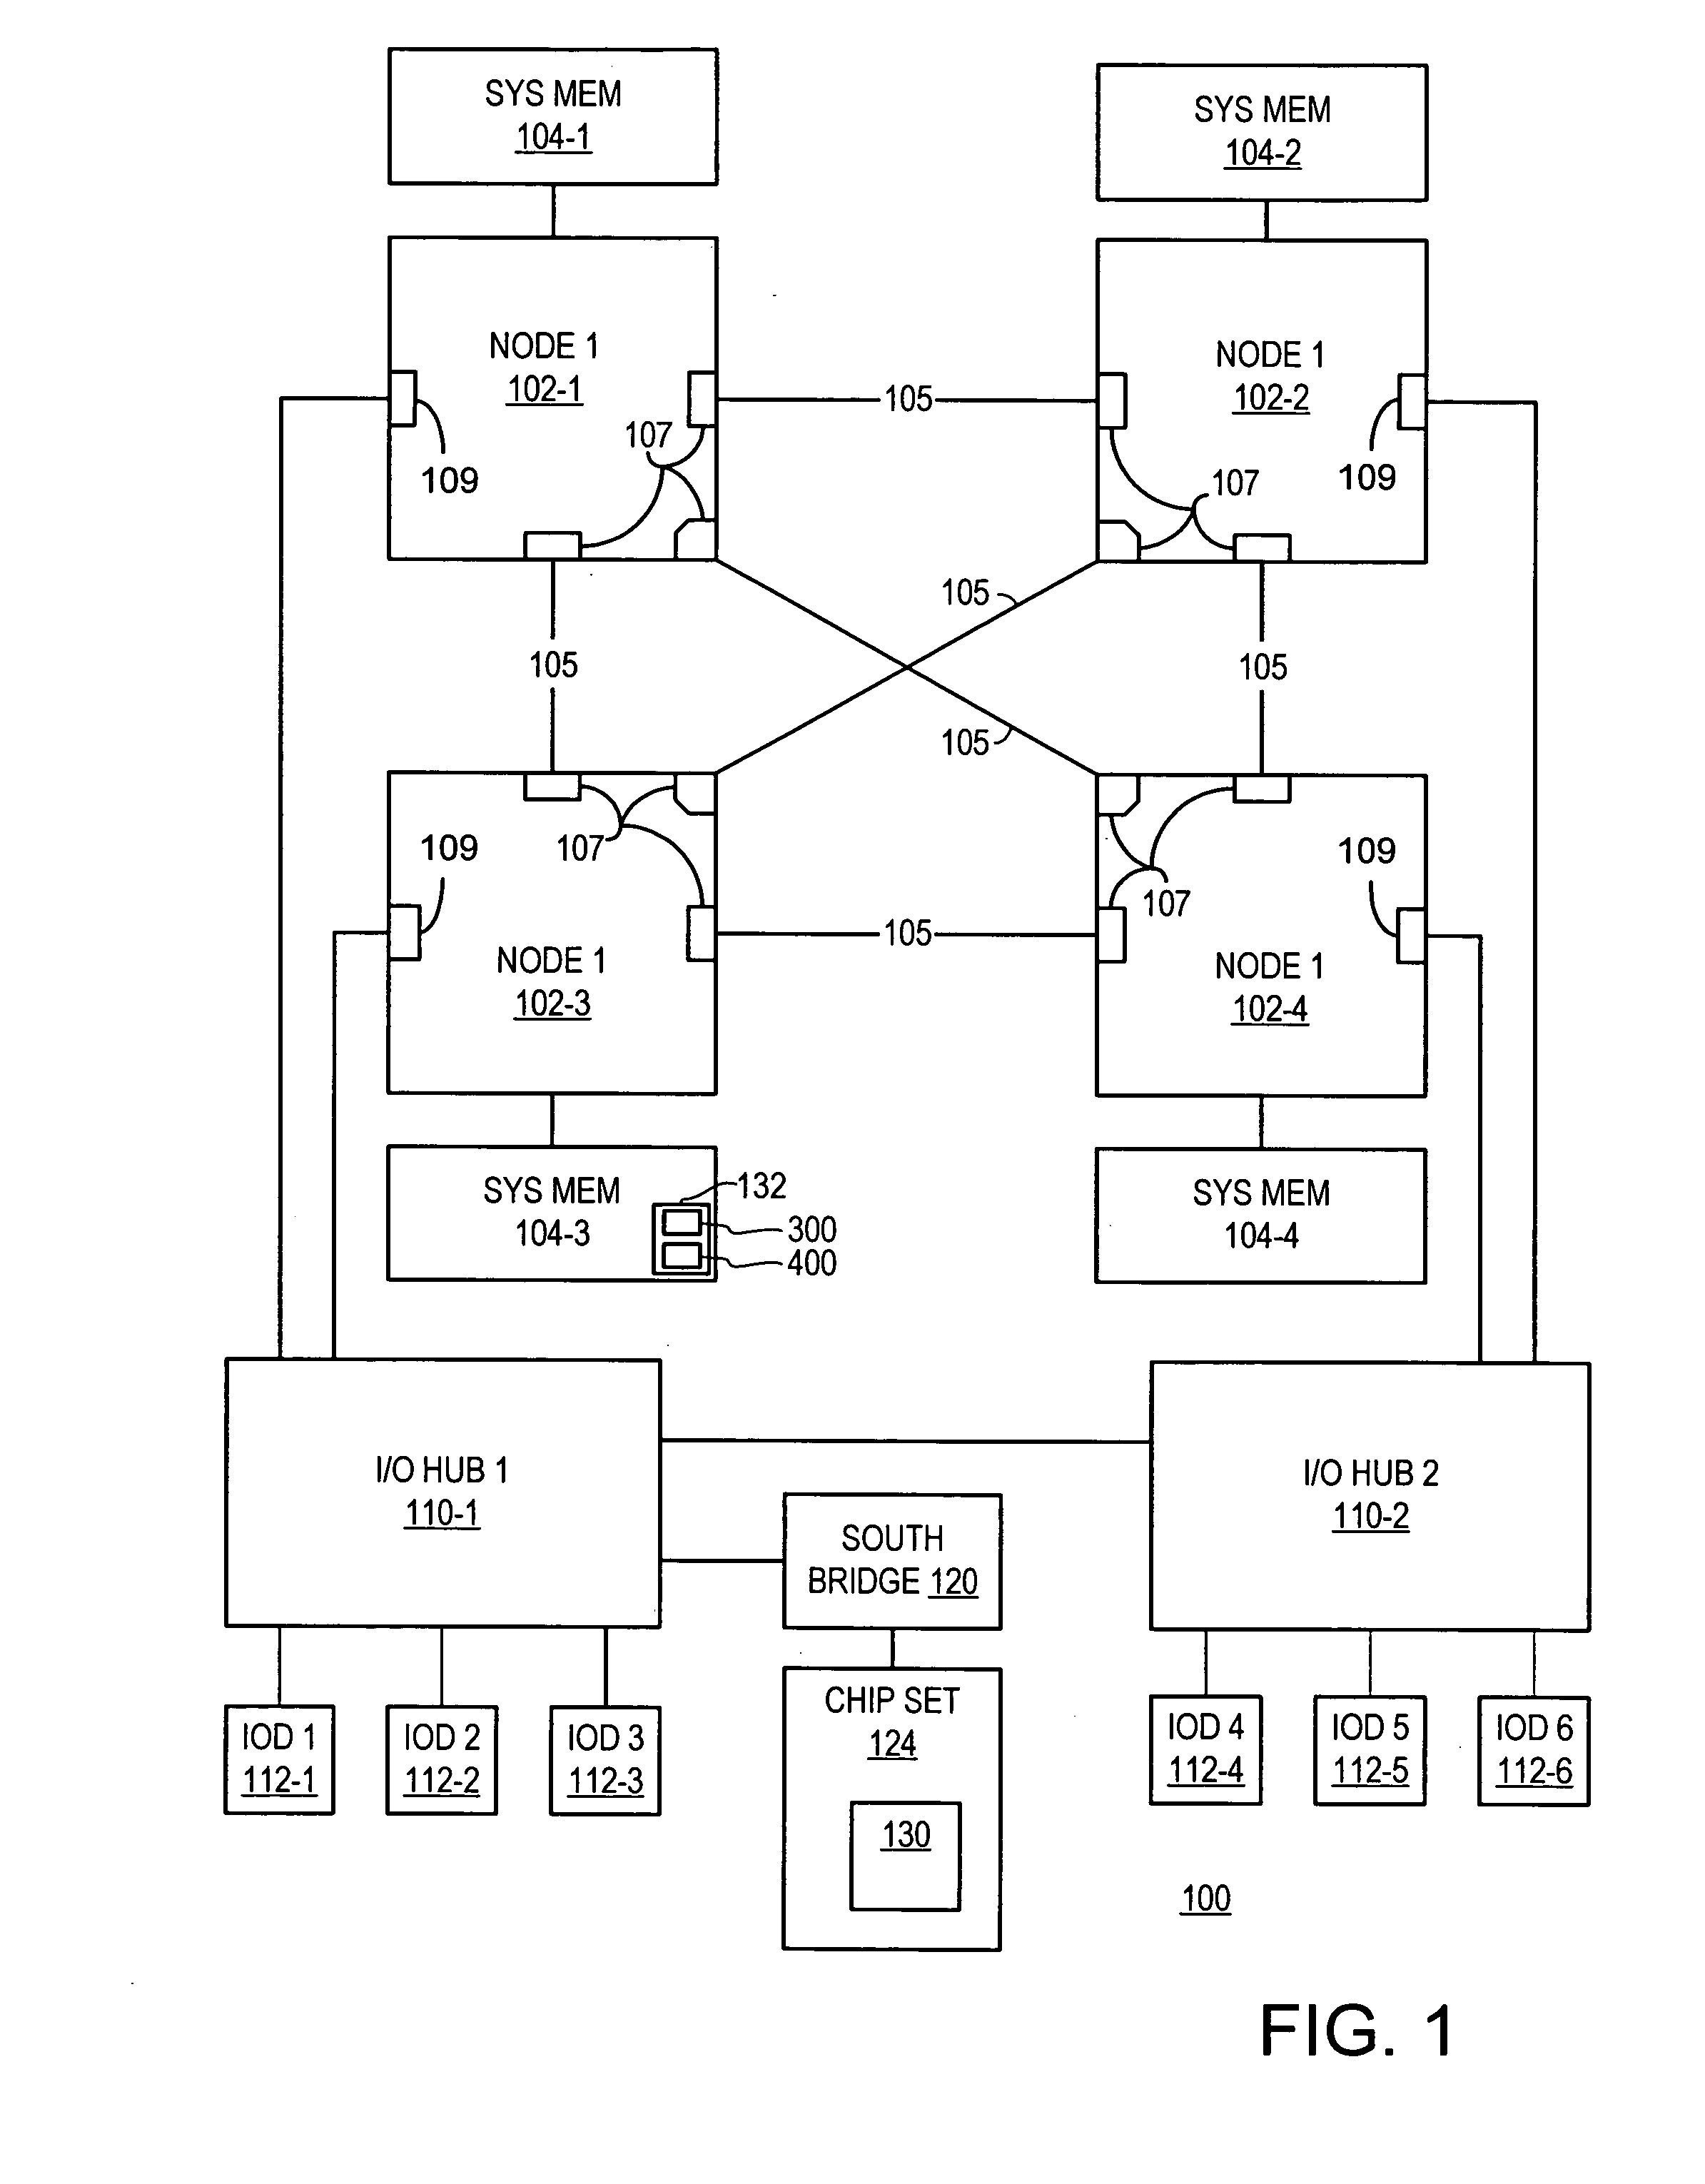 Modifying node descriptors to reflect memory migration in an information handling system with non-uniform memory access